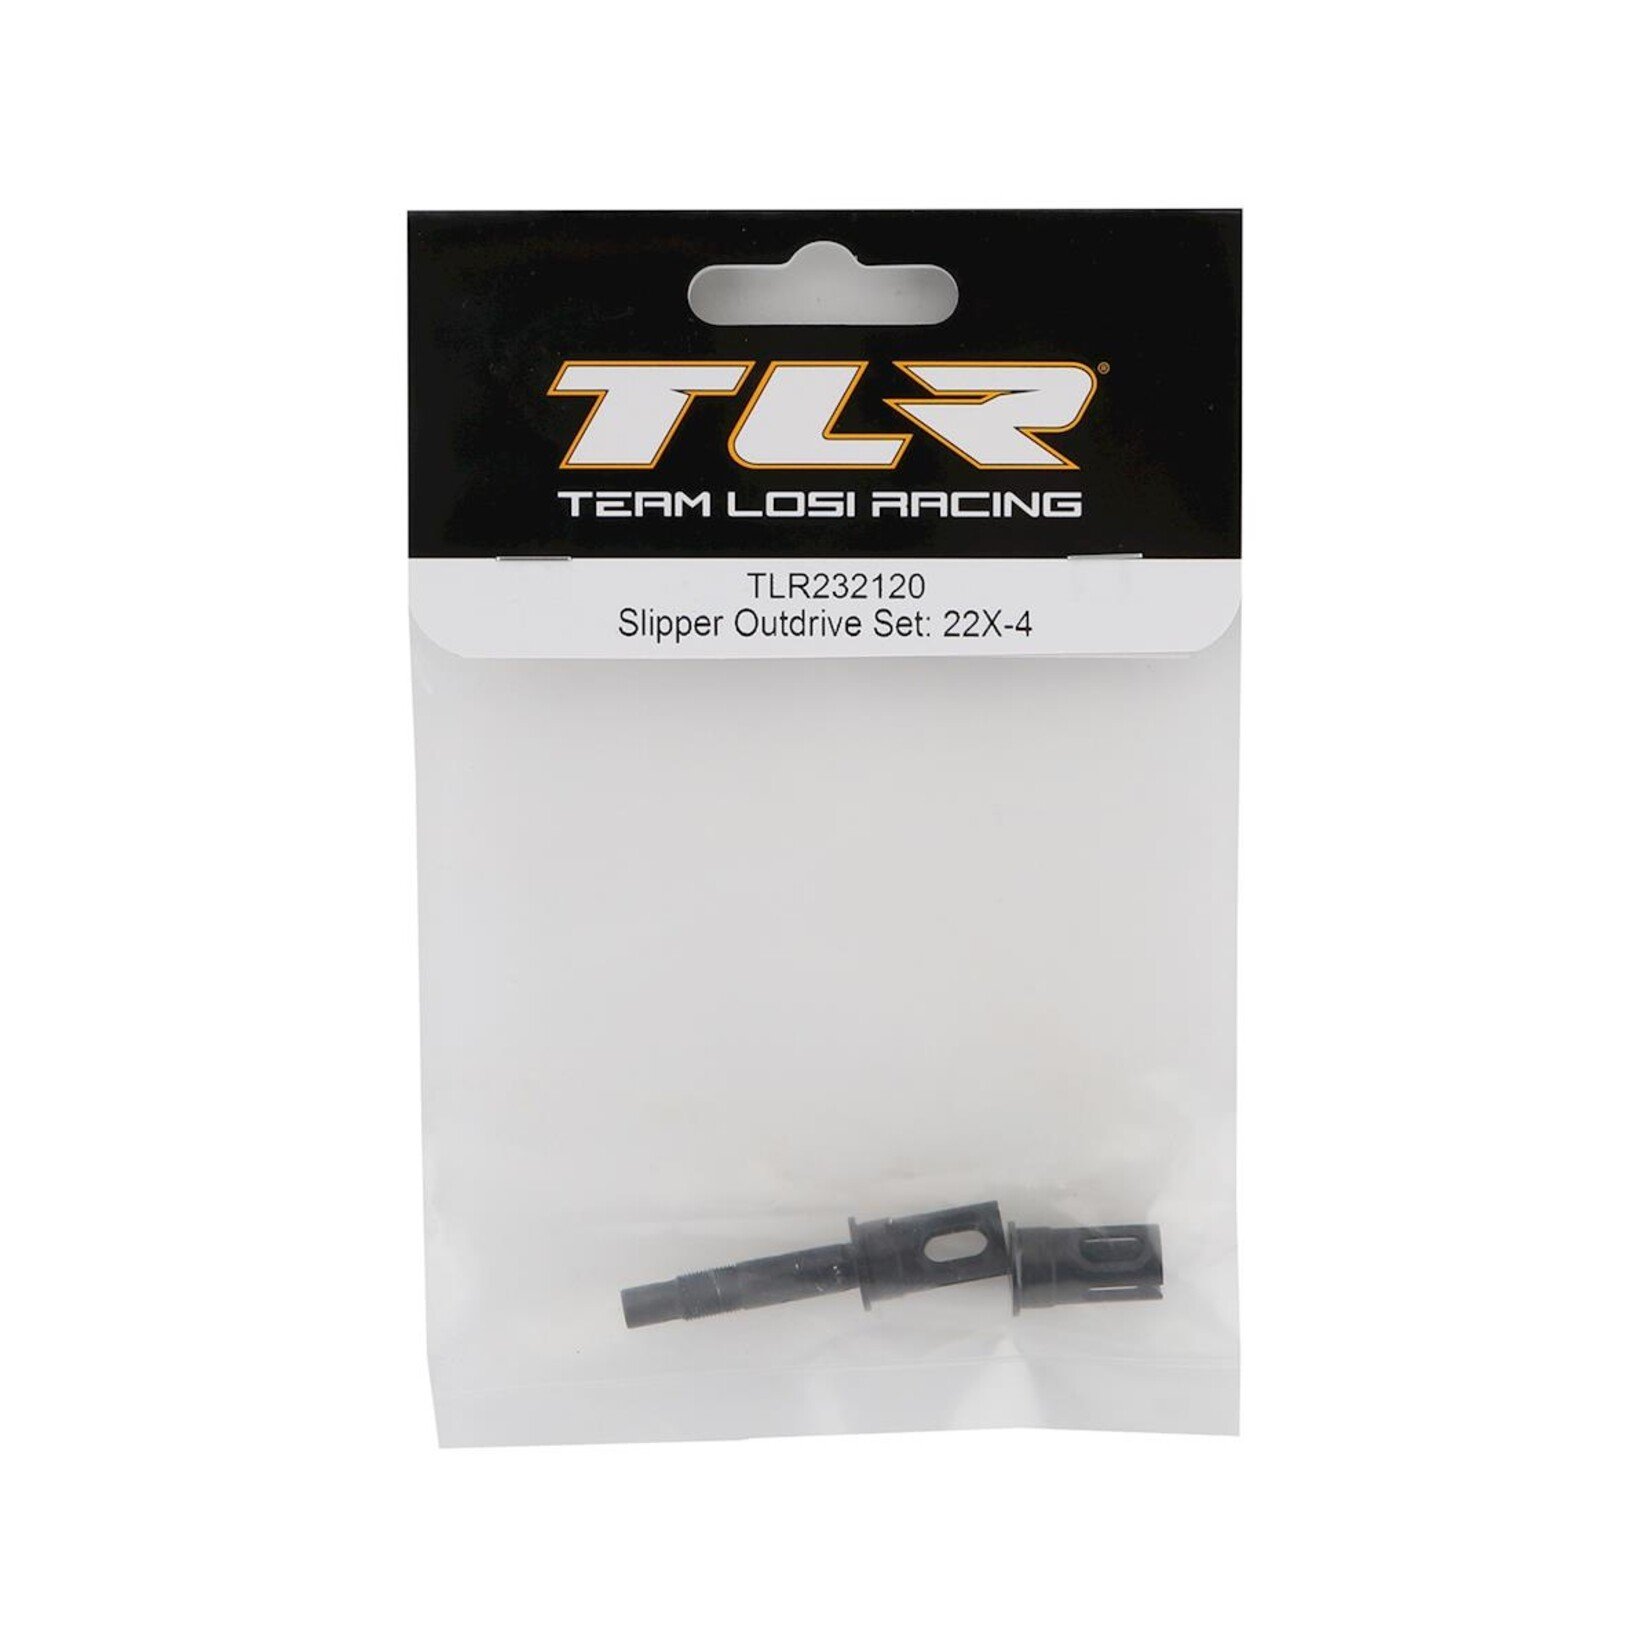 TLR Team Losi Racing 22X-4 Slipper Outdrive Set #TLR232120